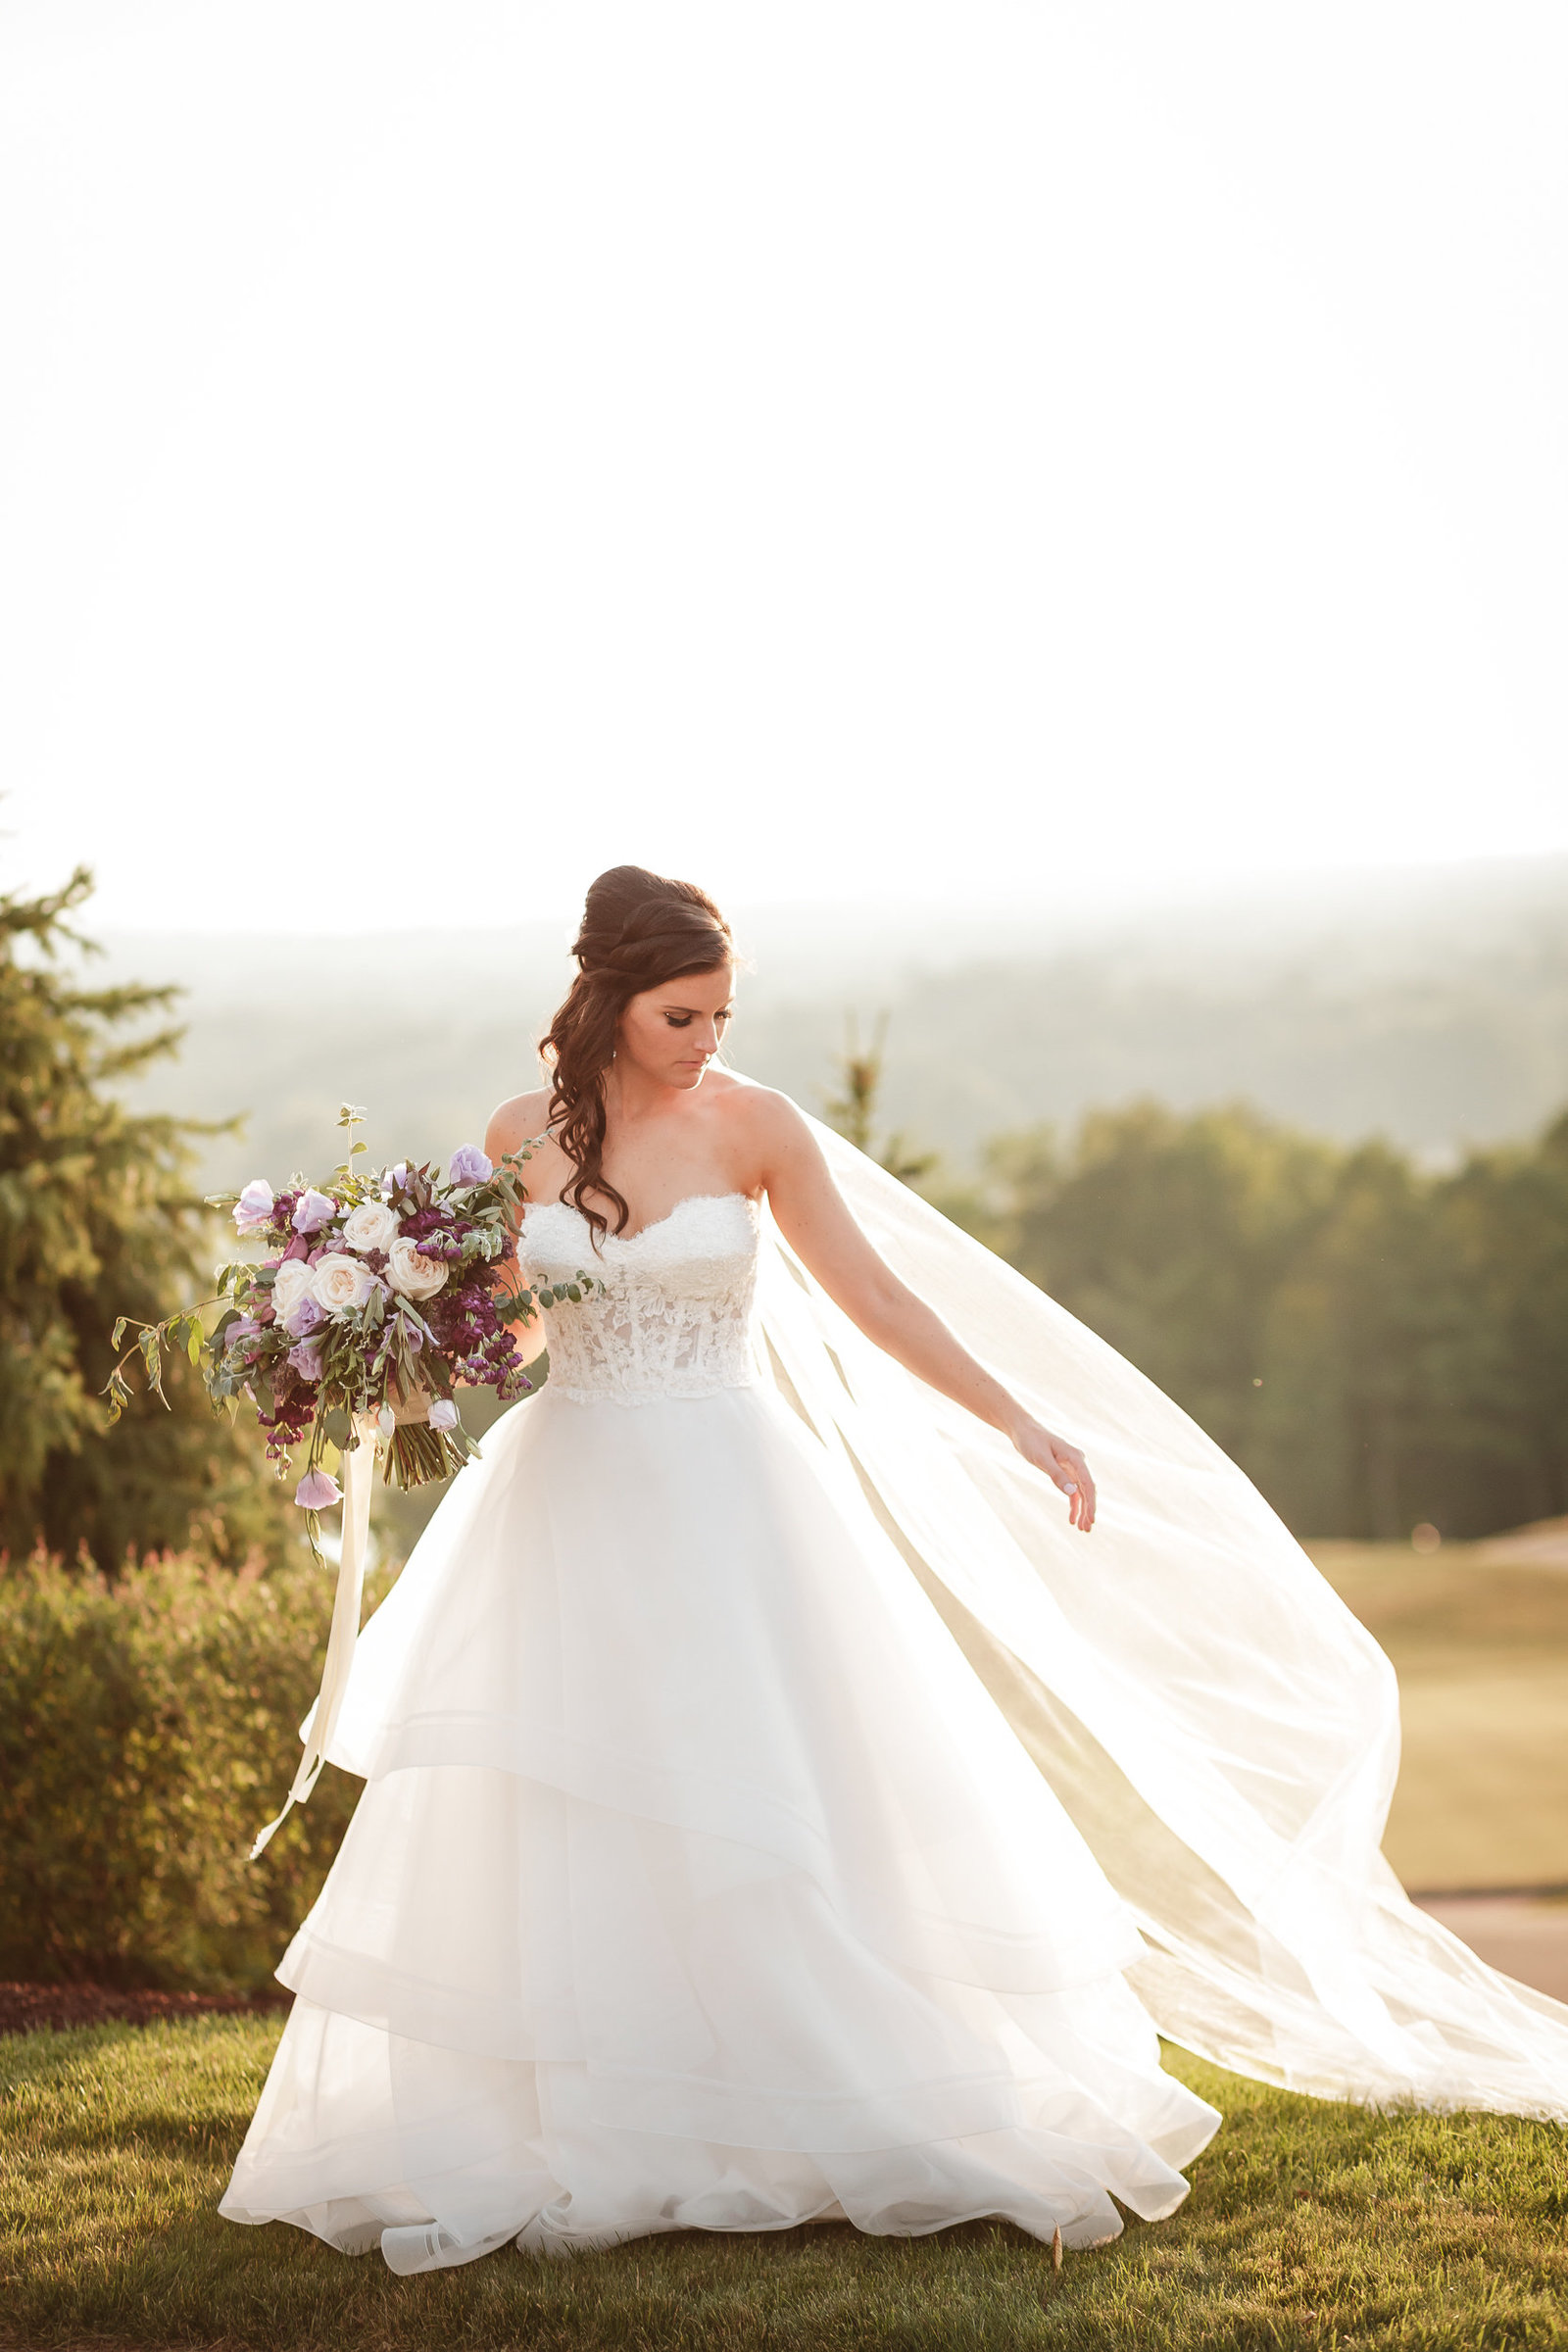 Beautiful bride at Greathorse in Massachusetts by Jamerlyn Brown Photography